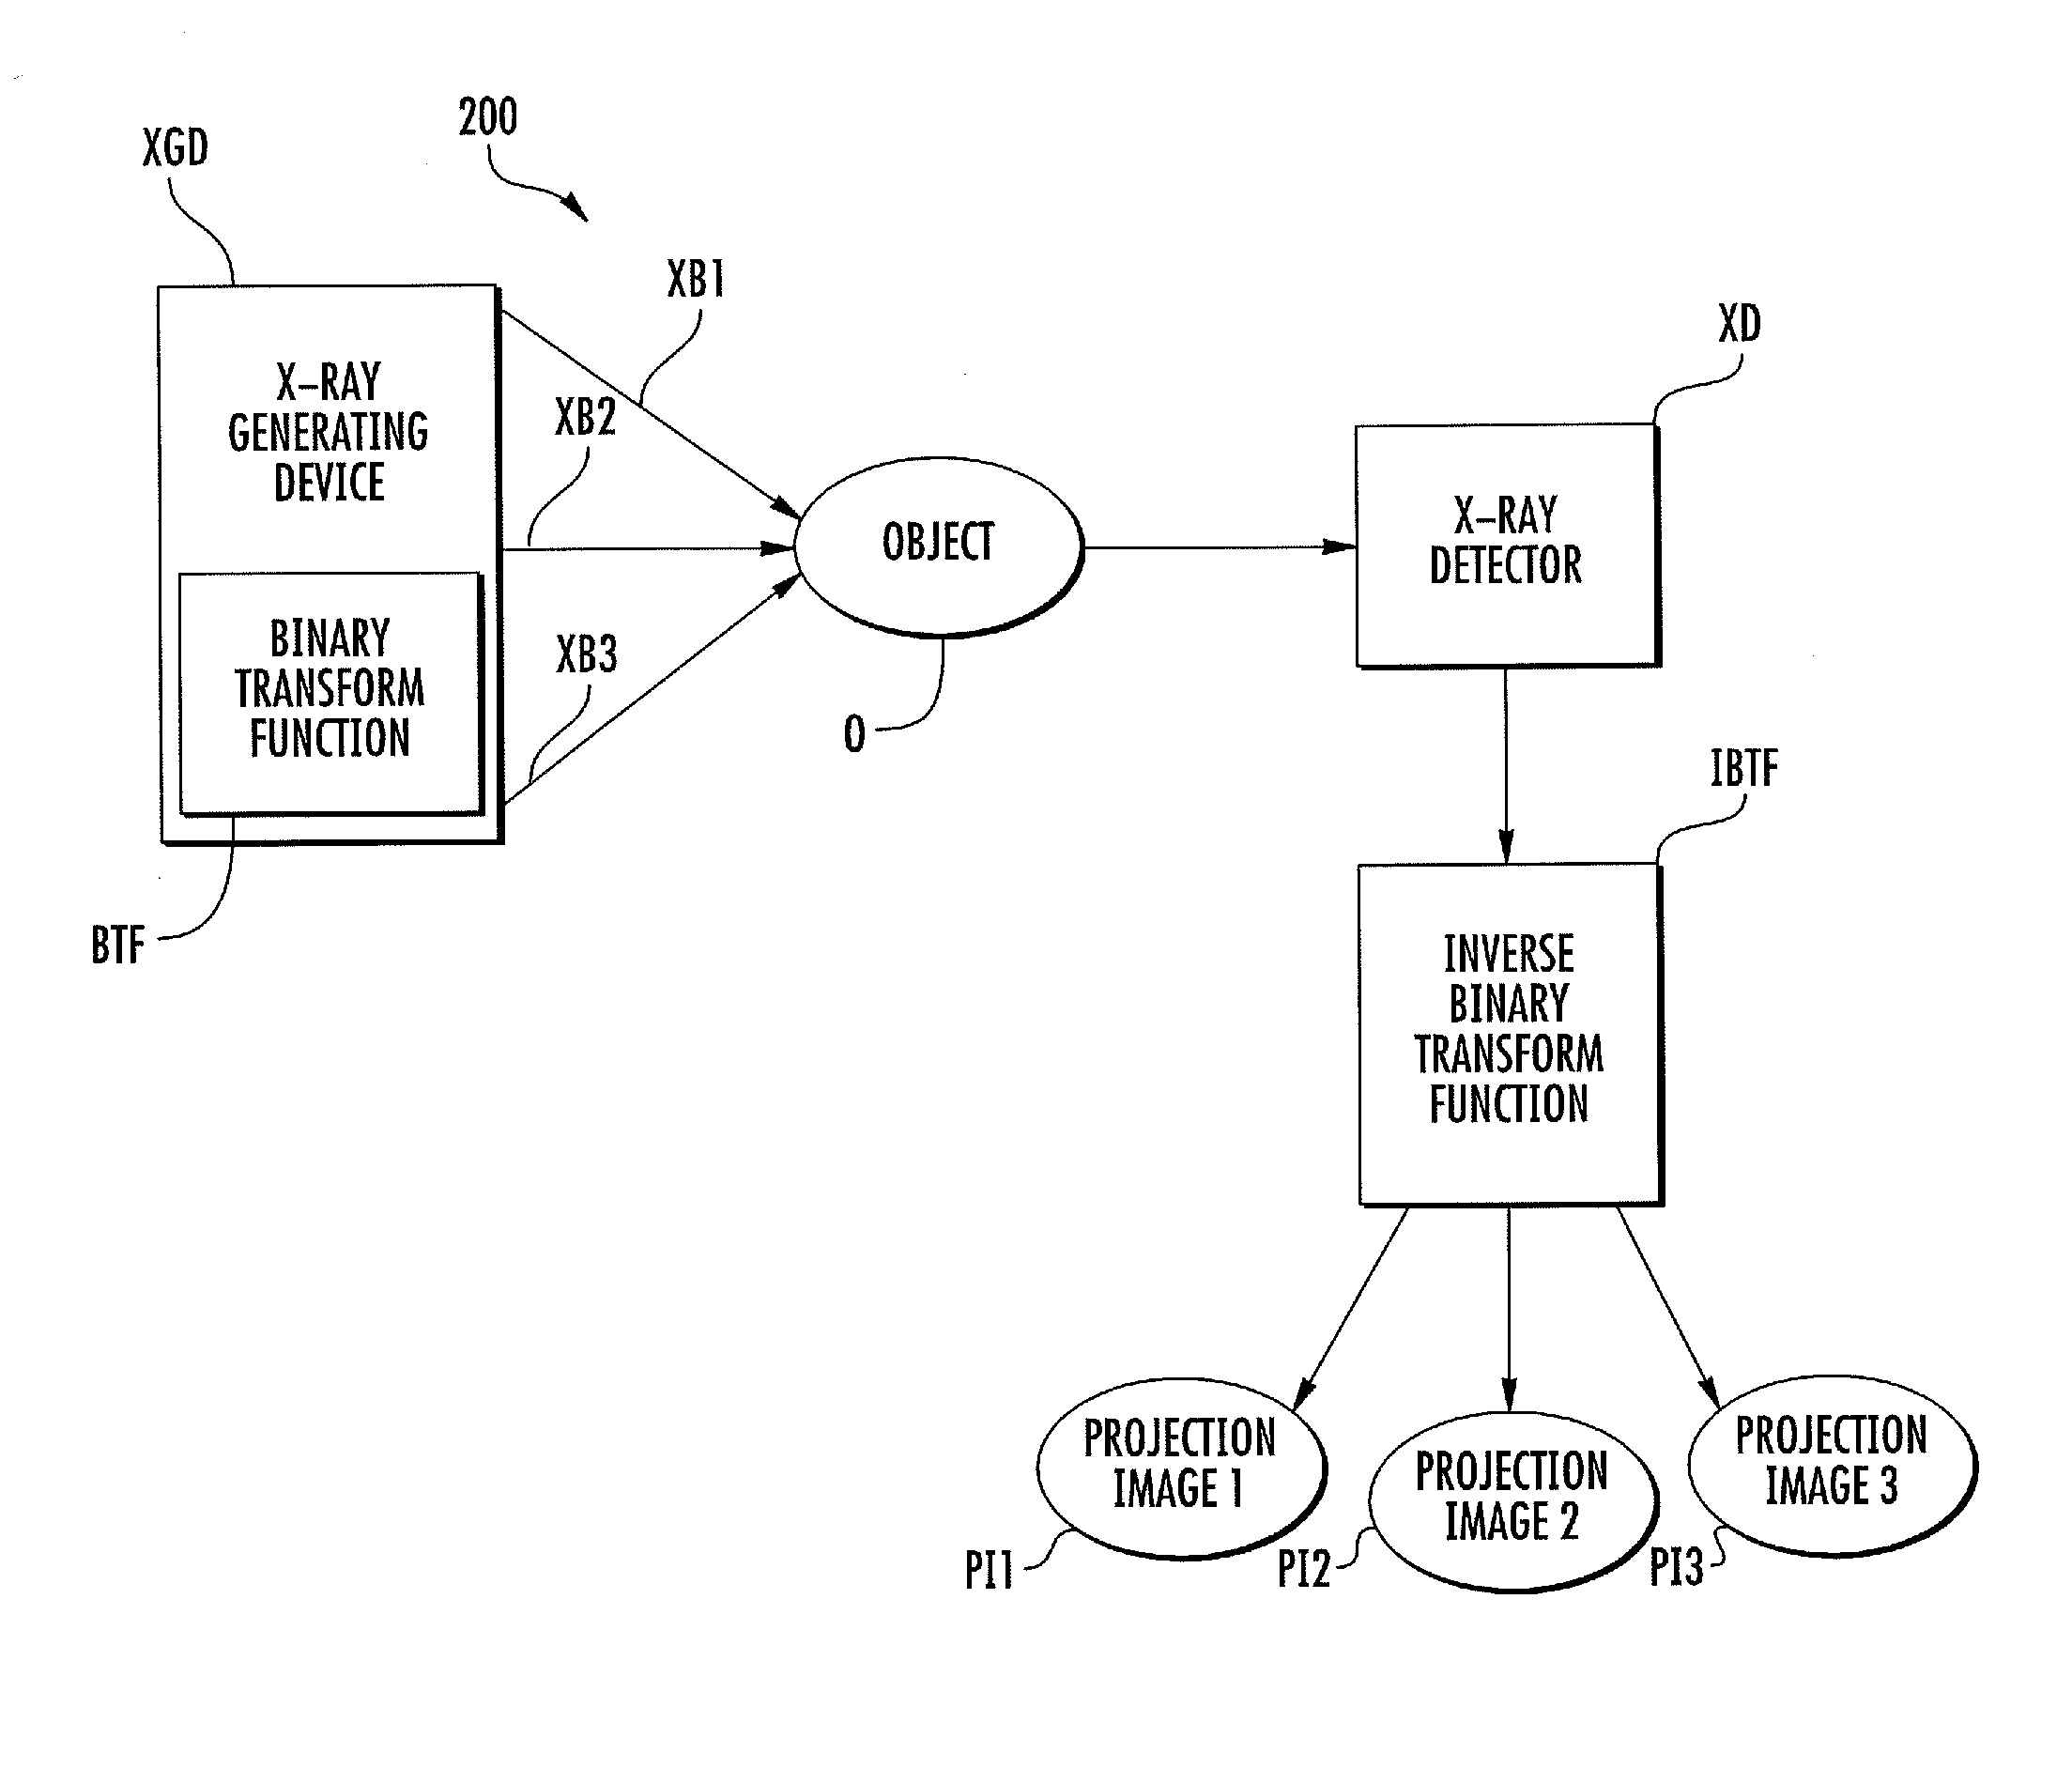 Stationary gantry computed tomography systems and methods with distributed x-ray source arrays